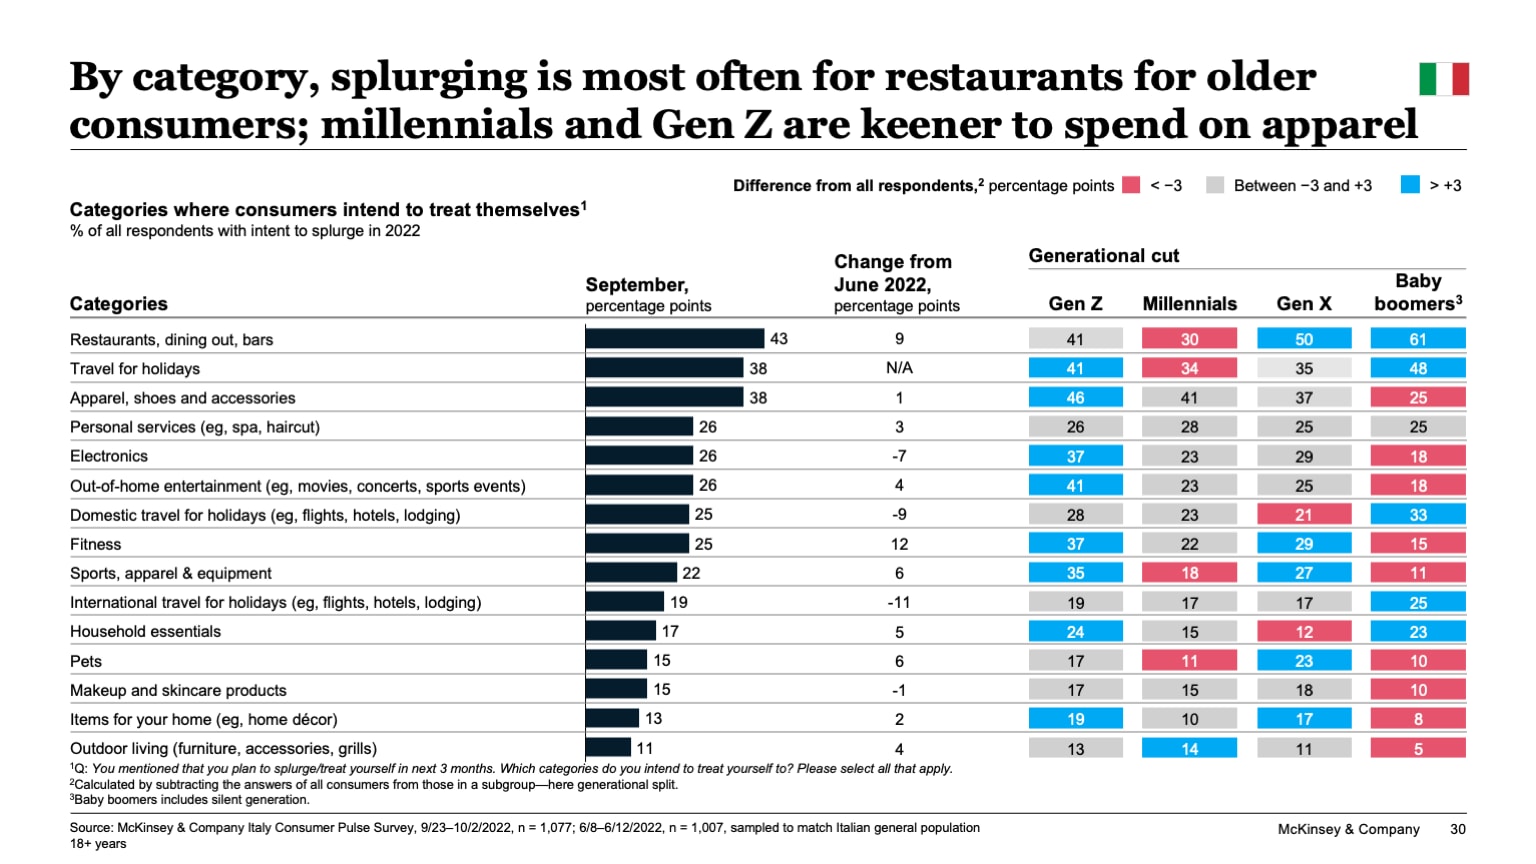 By category, splurging is most often for restaurants for older consumers; millennials and Gen Z are keener to spend on apparel